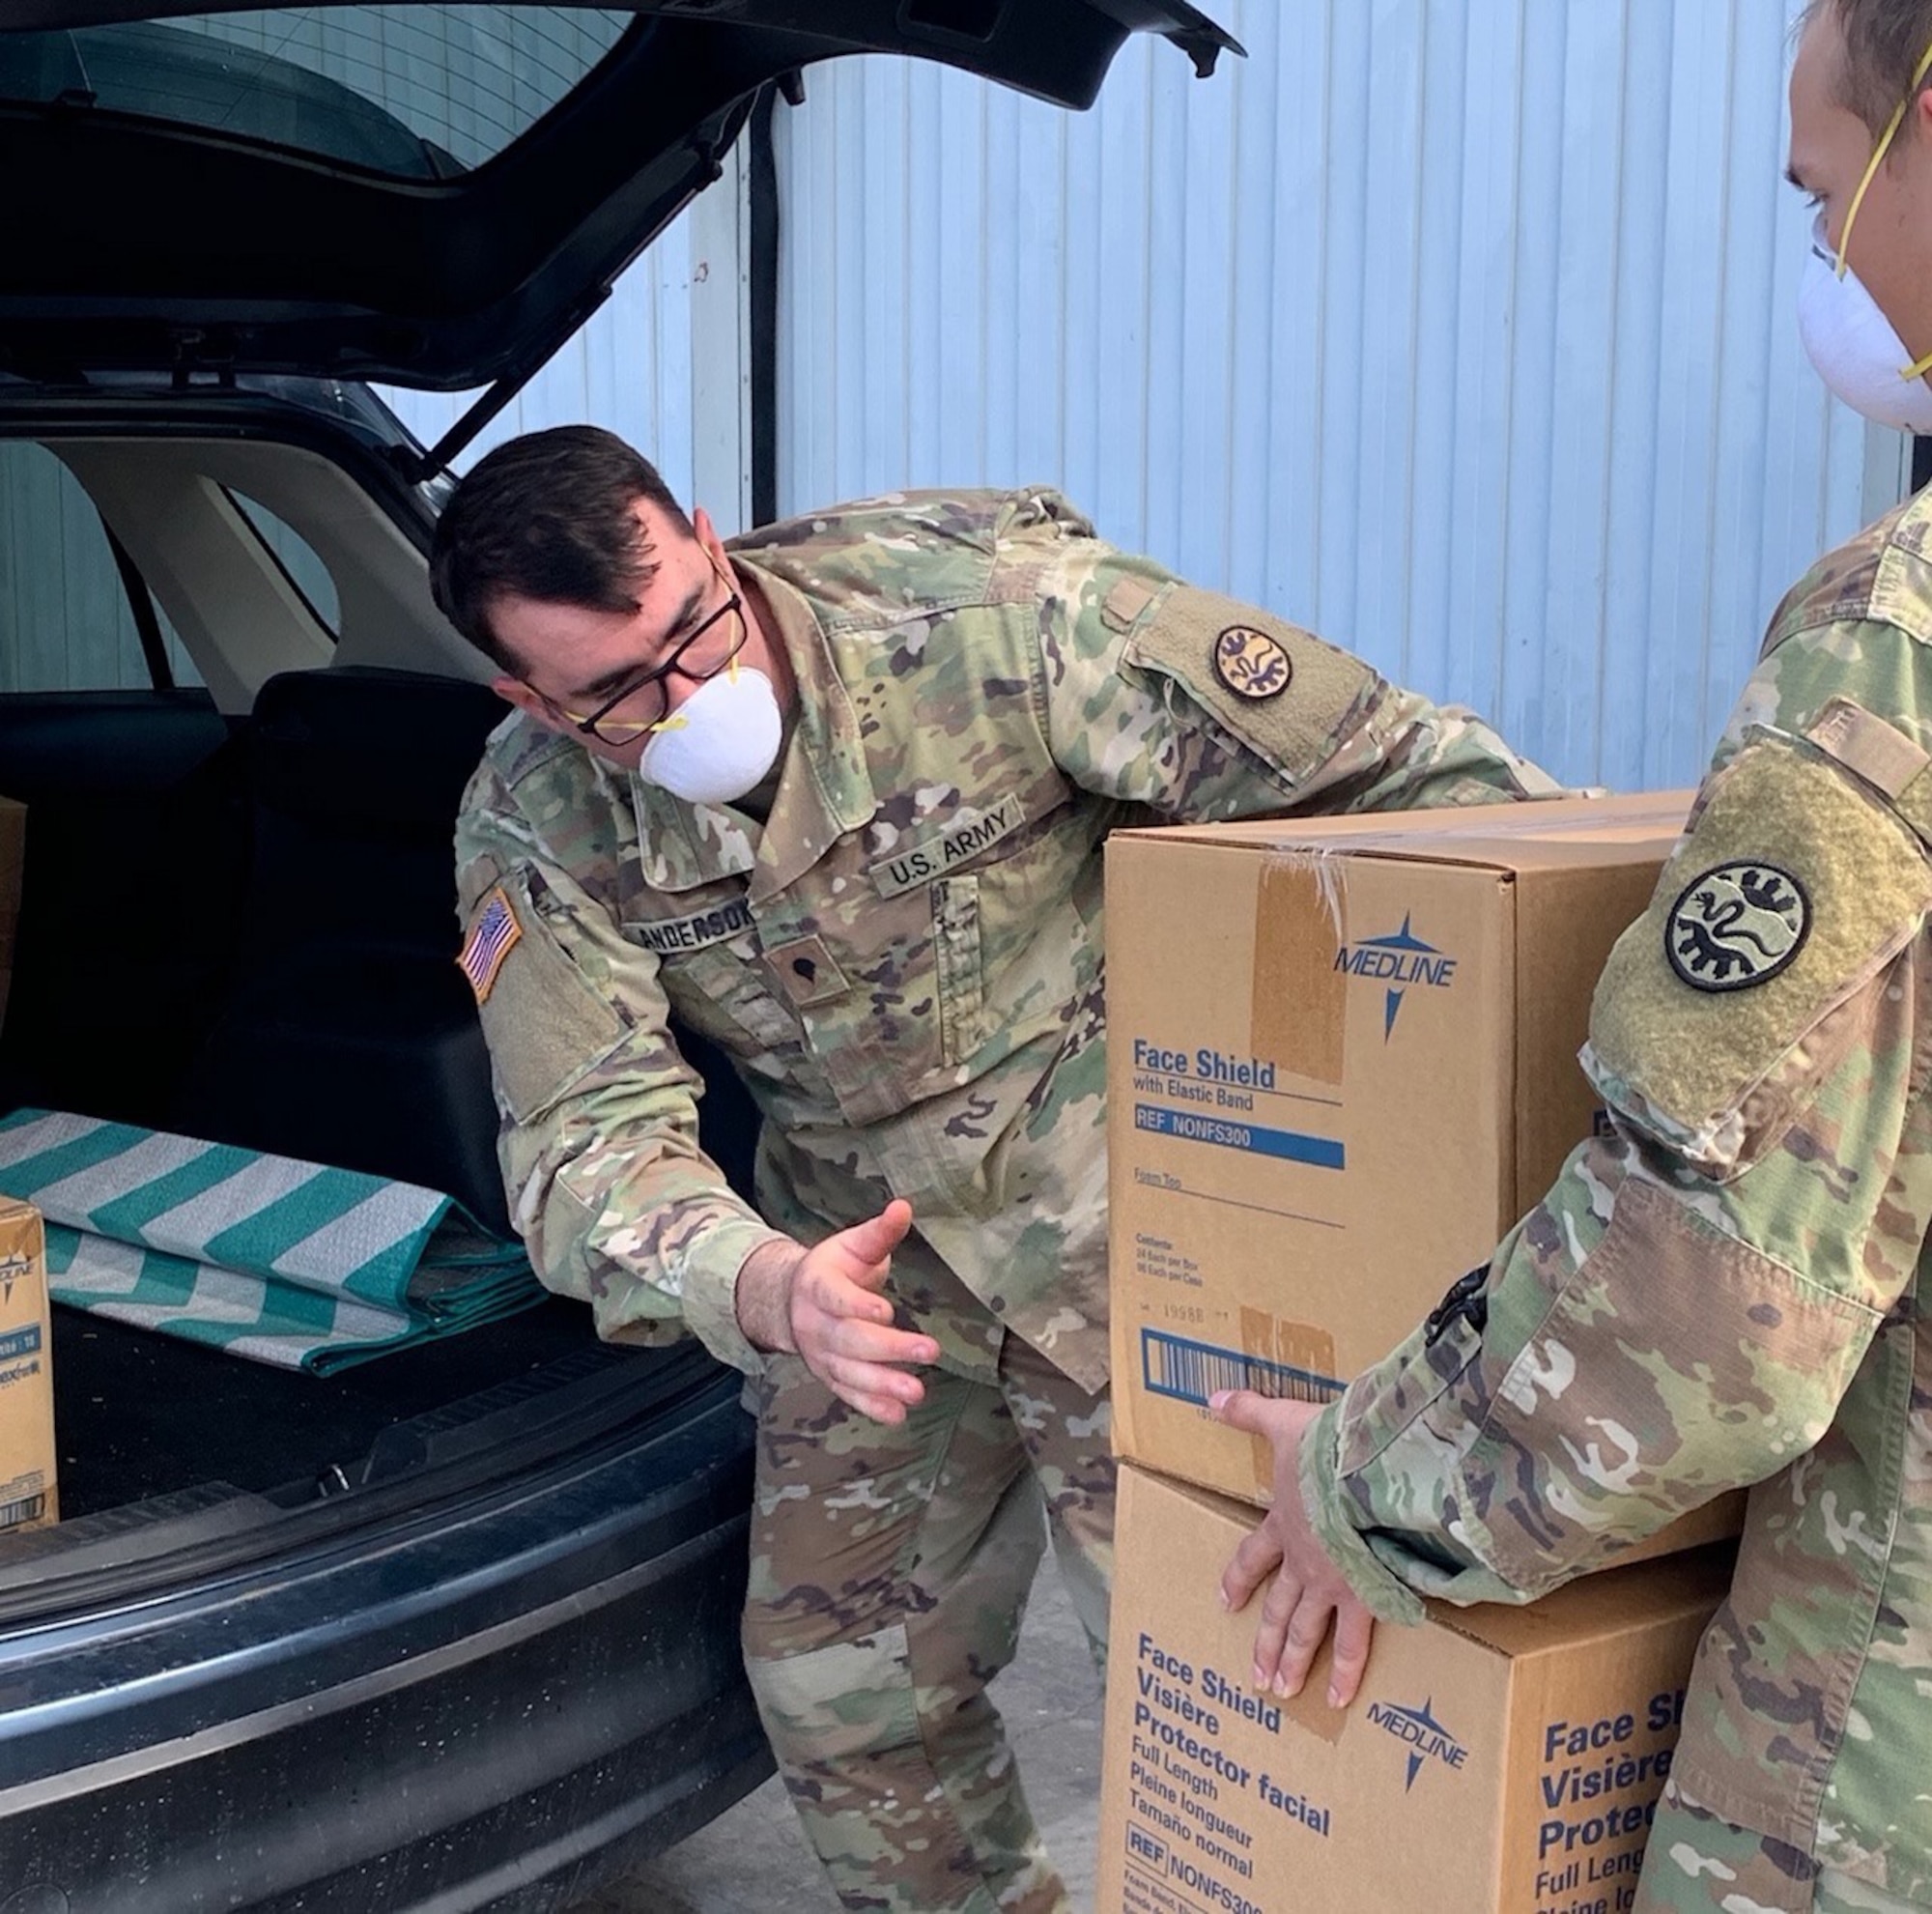 Soldiers of the Nevada Army National Guard receive medical supplies at a warehouse east of Sparks, Nevada, as part of the COVID-19 pandemic response in the Silver State. About 700 additional Nevada National Guard Soldiers and Airmen will enter the fight against COVID-19 this week, bringing the total to 800, the largest state activation in Nevada National Guard history.